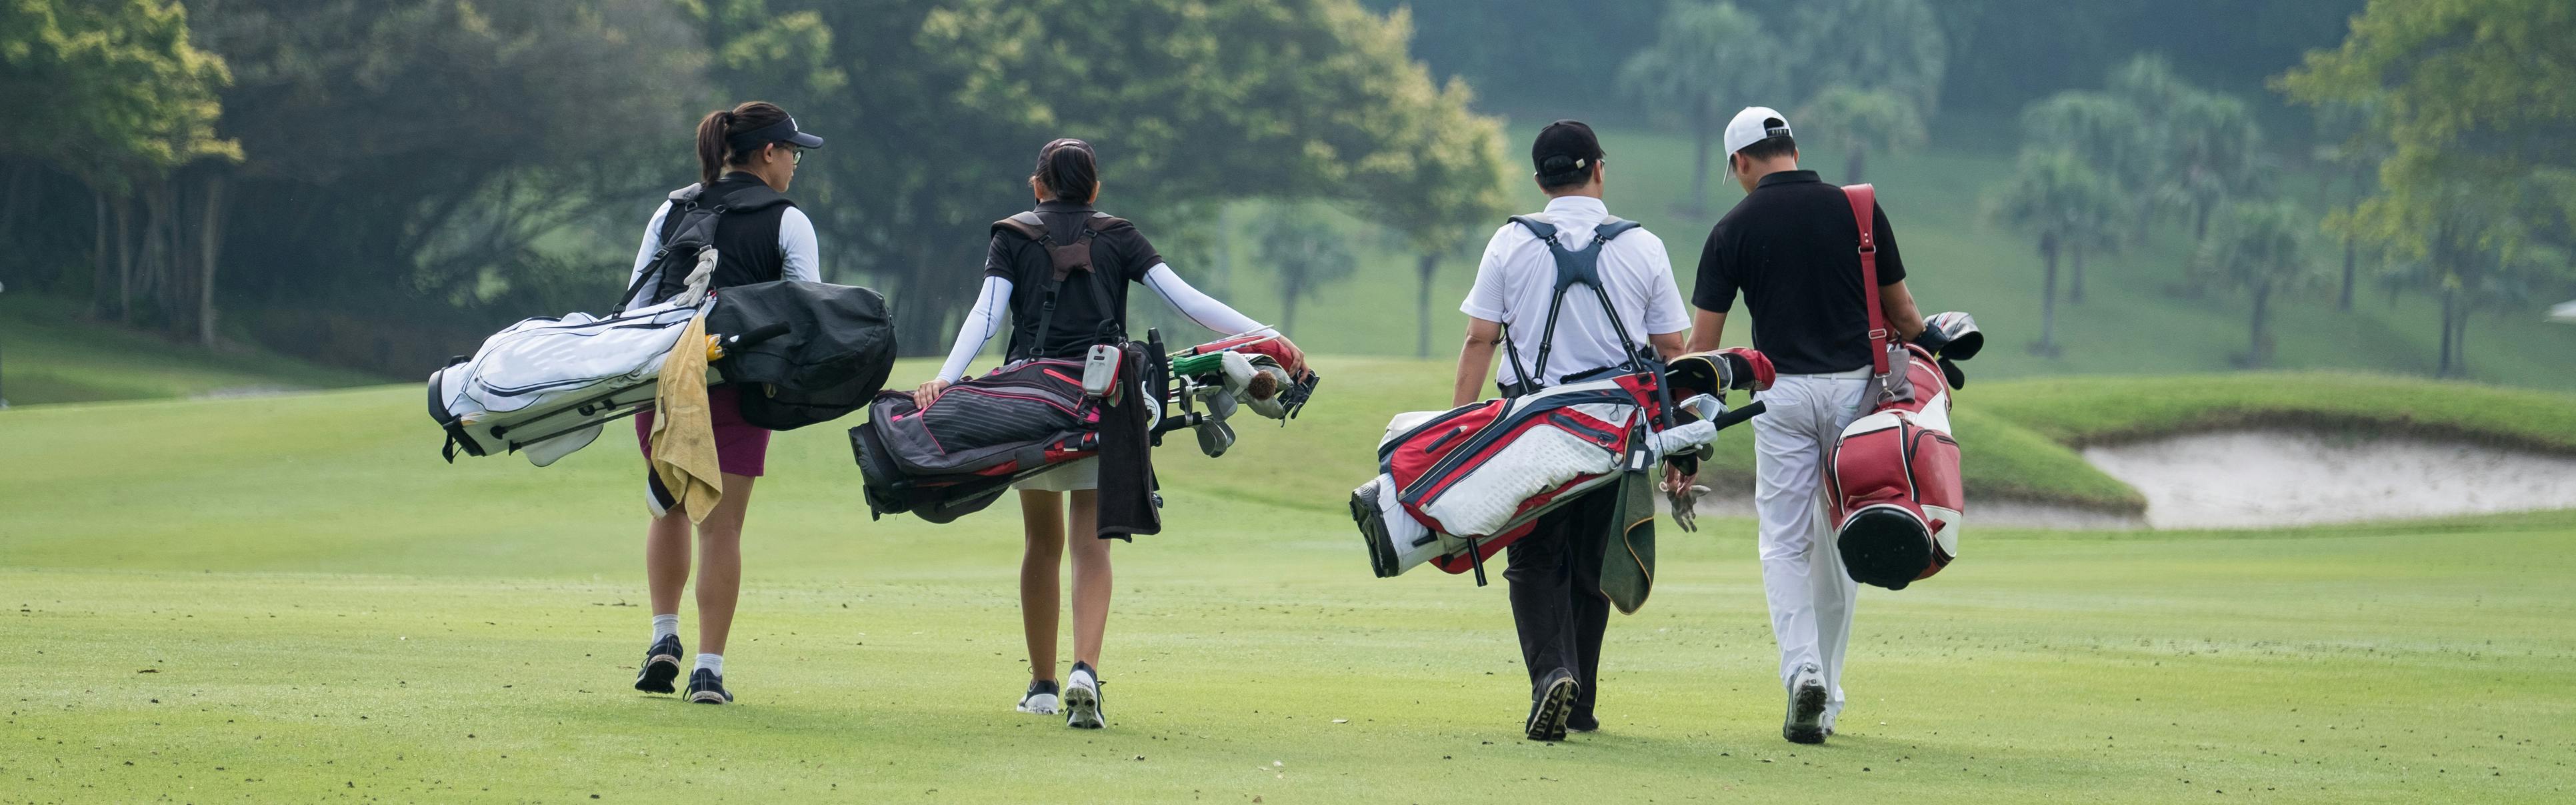 Four people carrying golf bags walk away from the camera towards the green